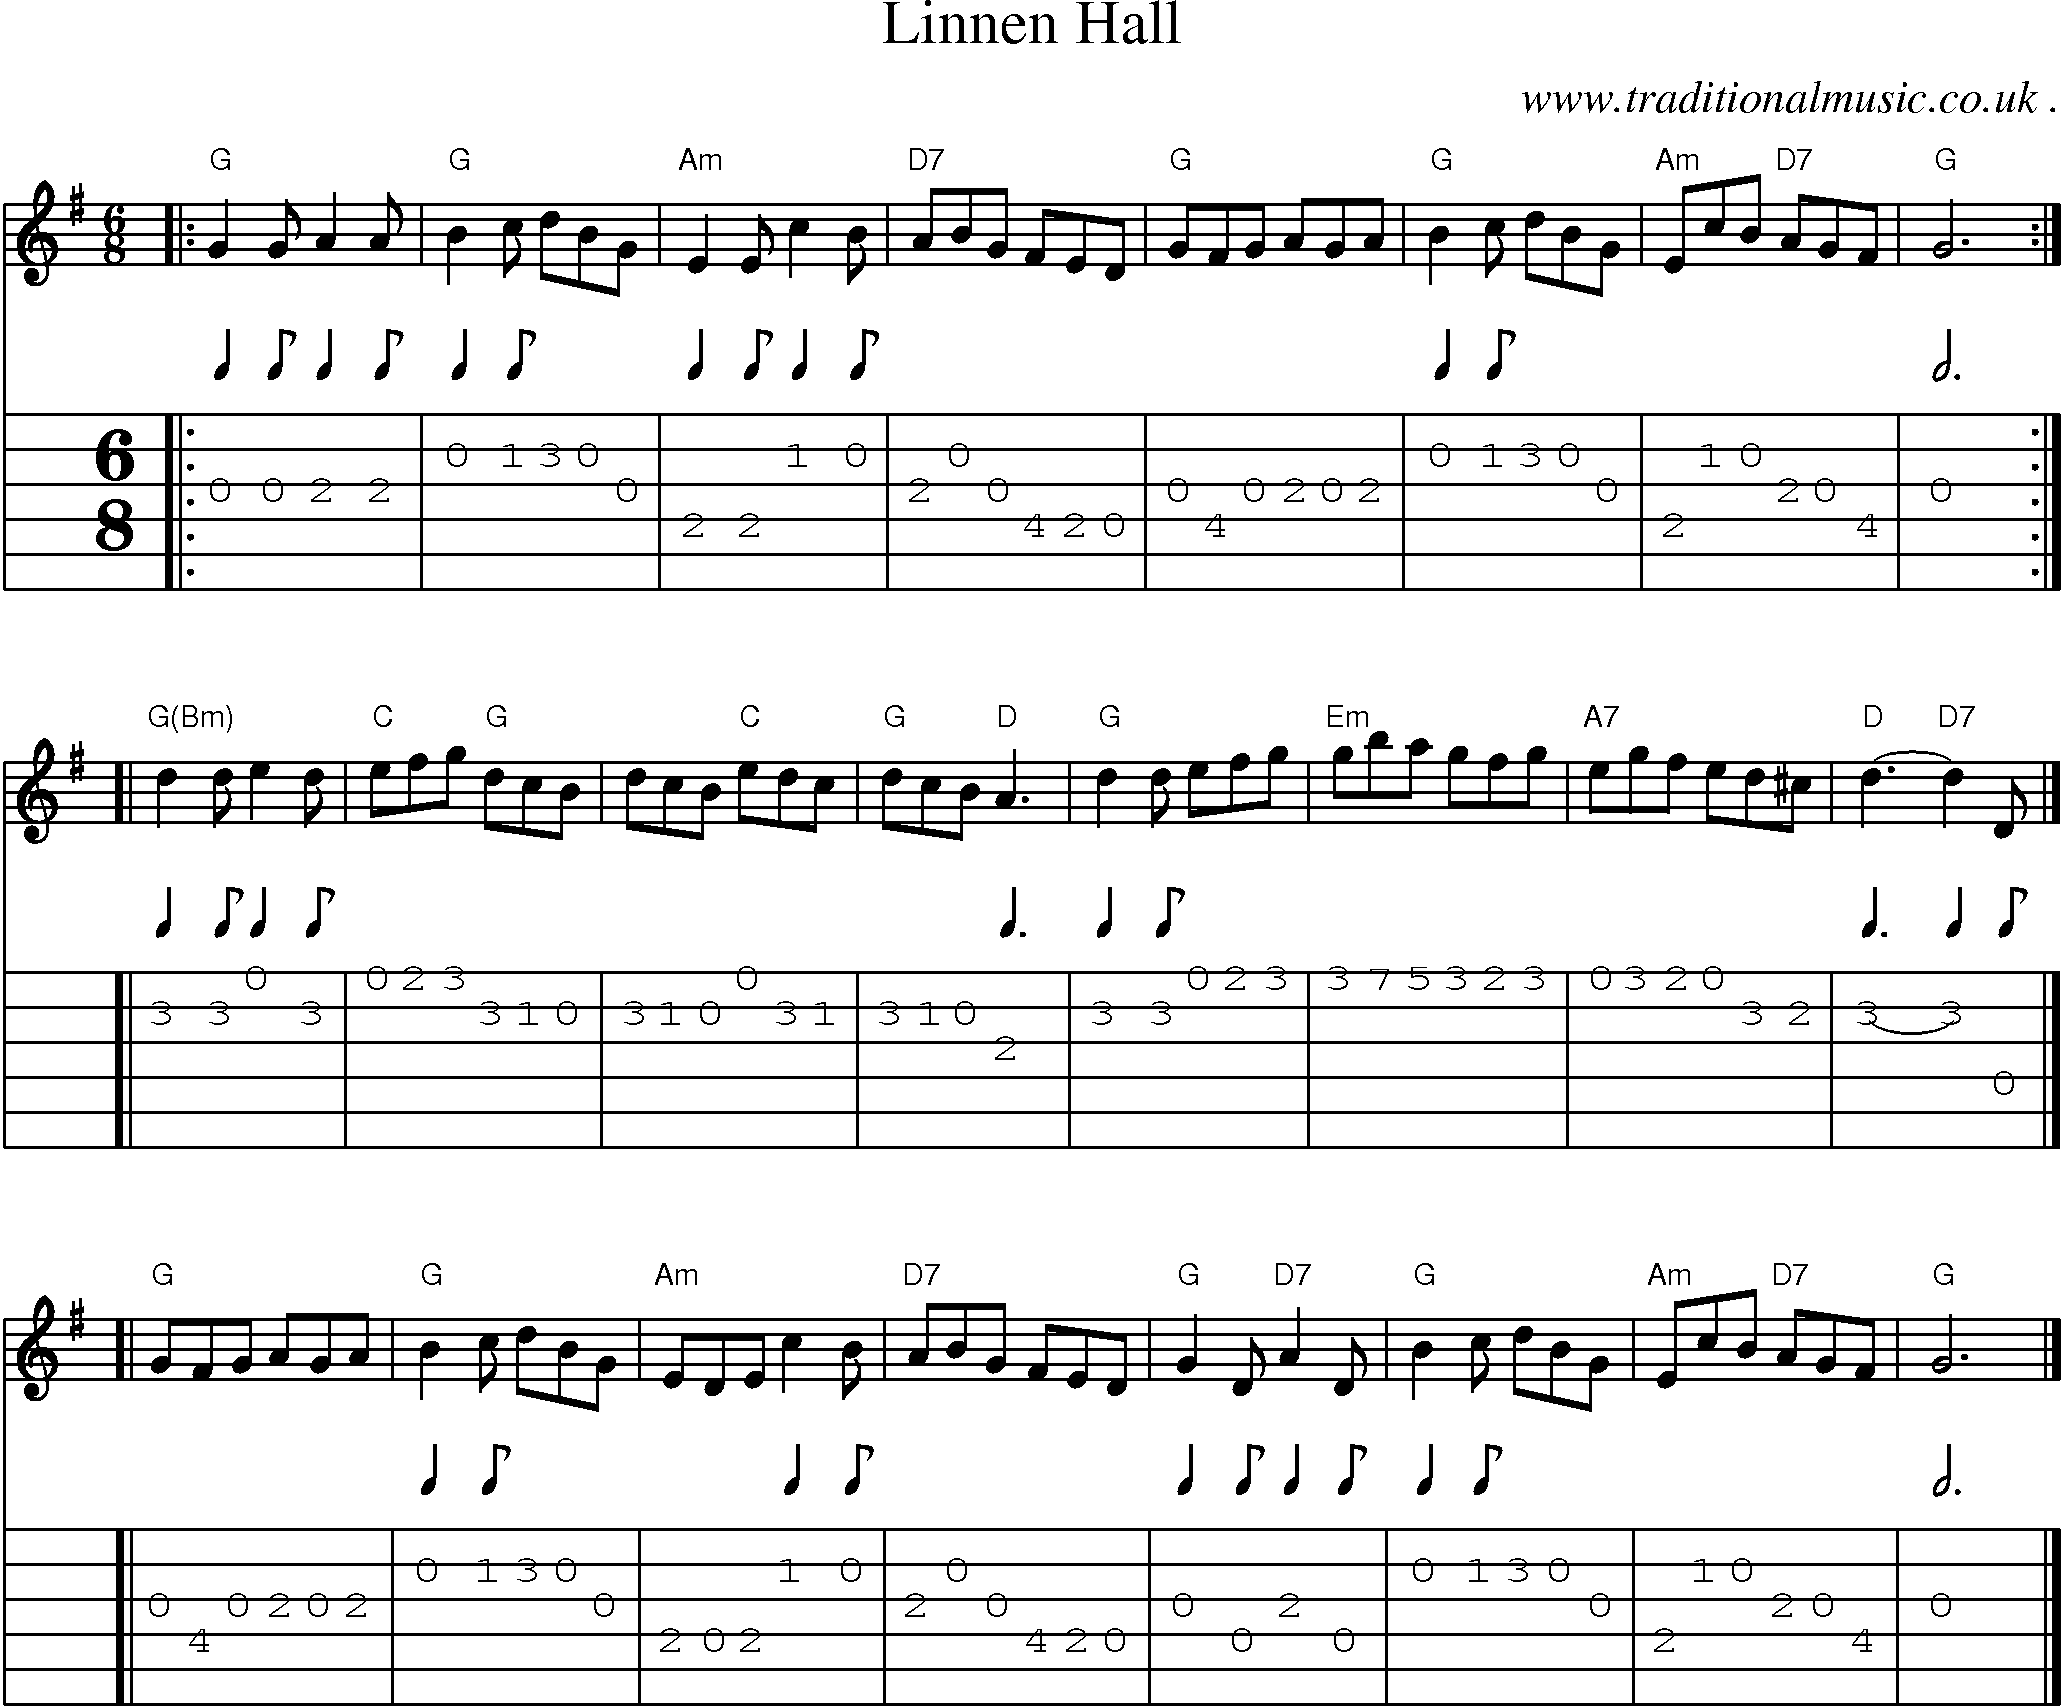 Sheet-music  score, Chords and Guitar Tabs for Linnen Hall